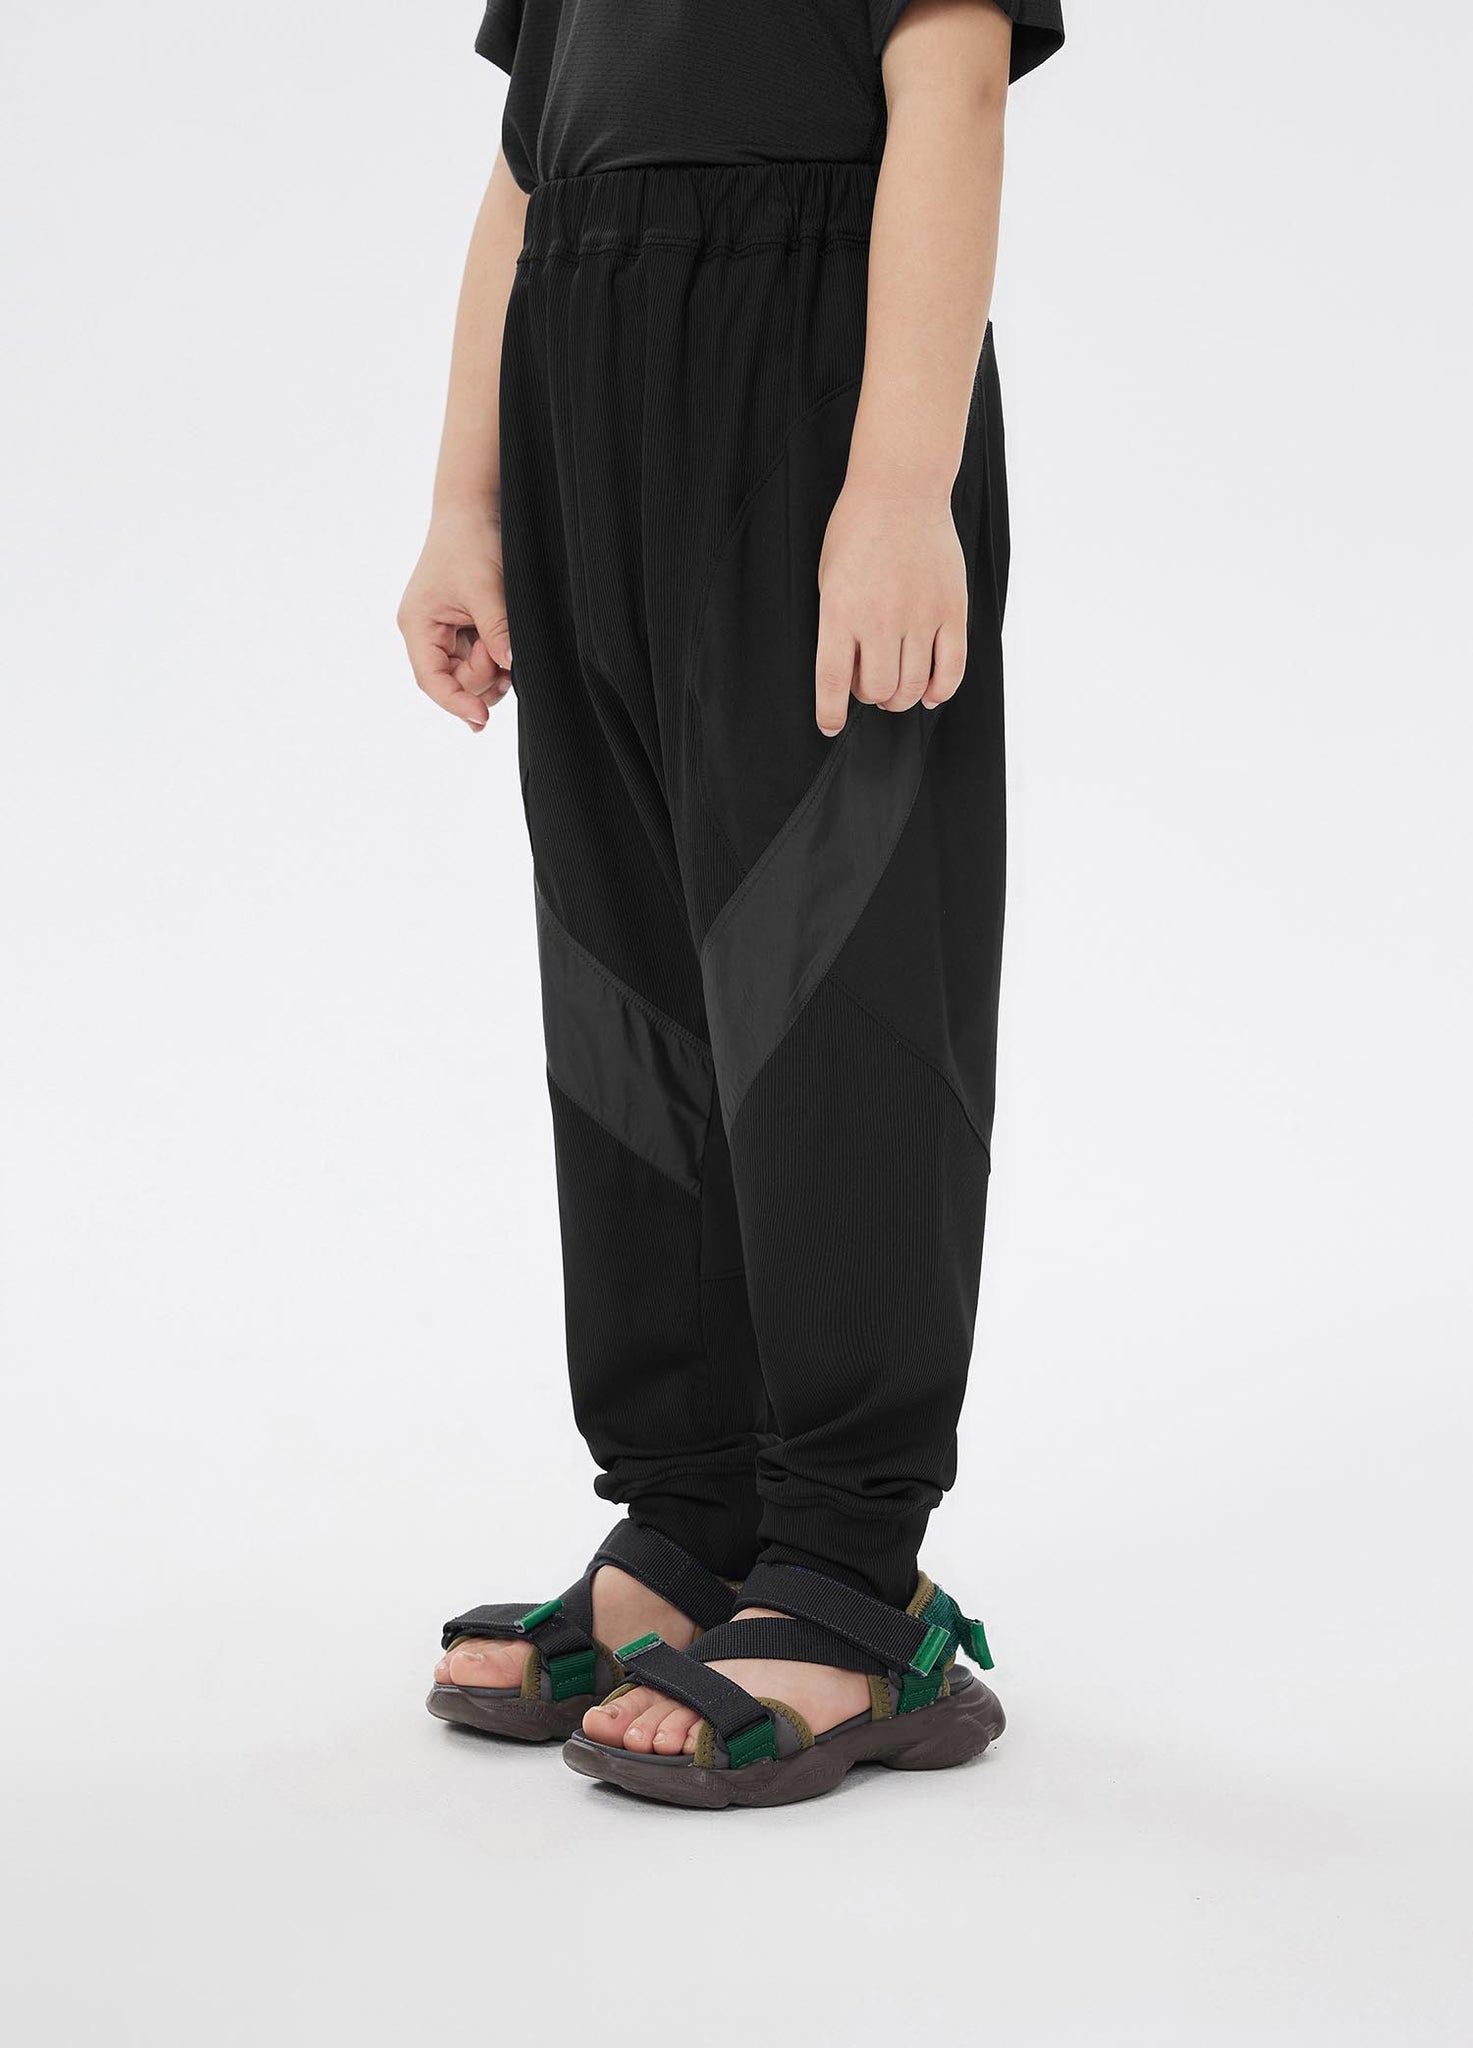 Pants / jnby by JNBY Contrast Color Patchwork Pants